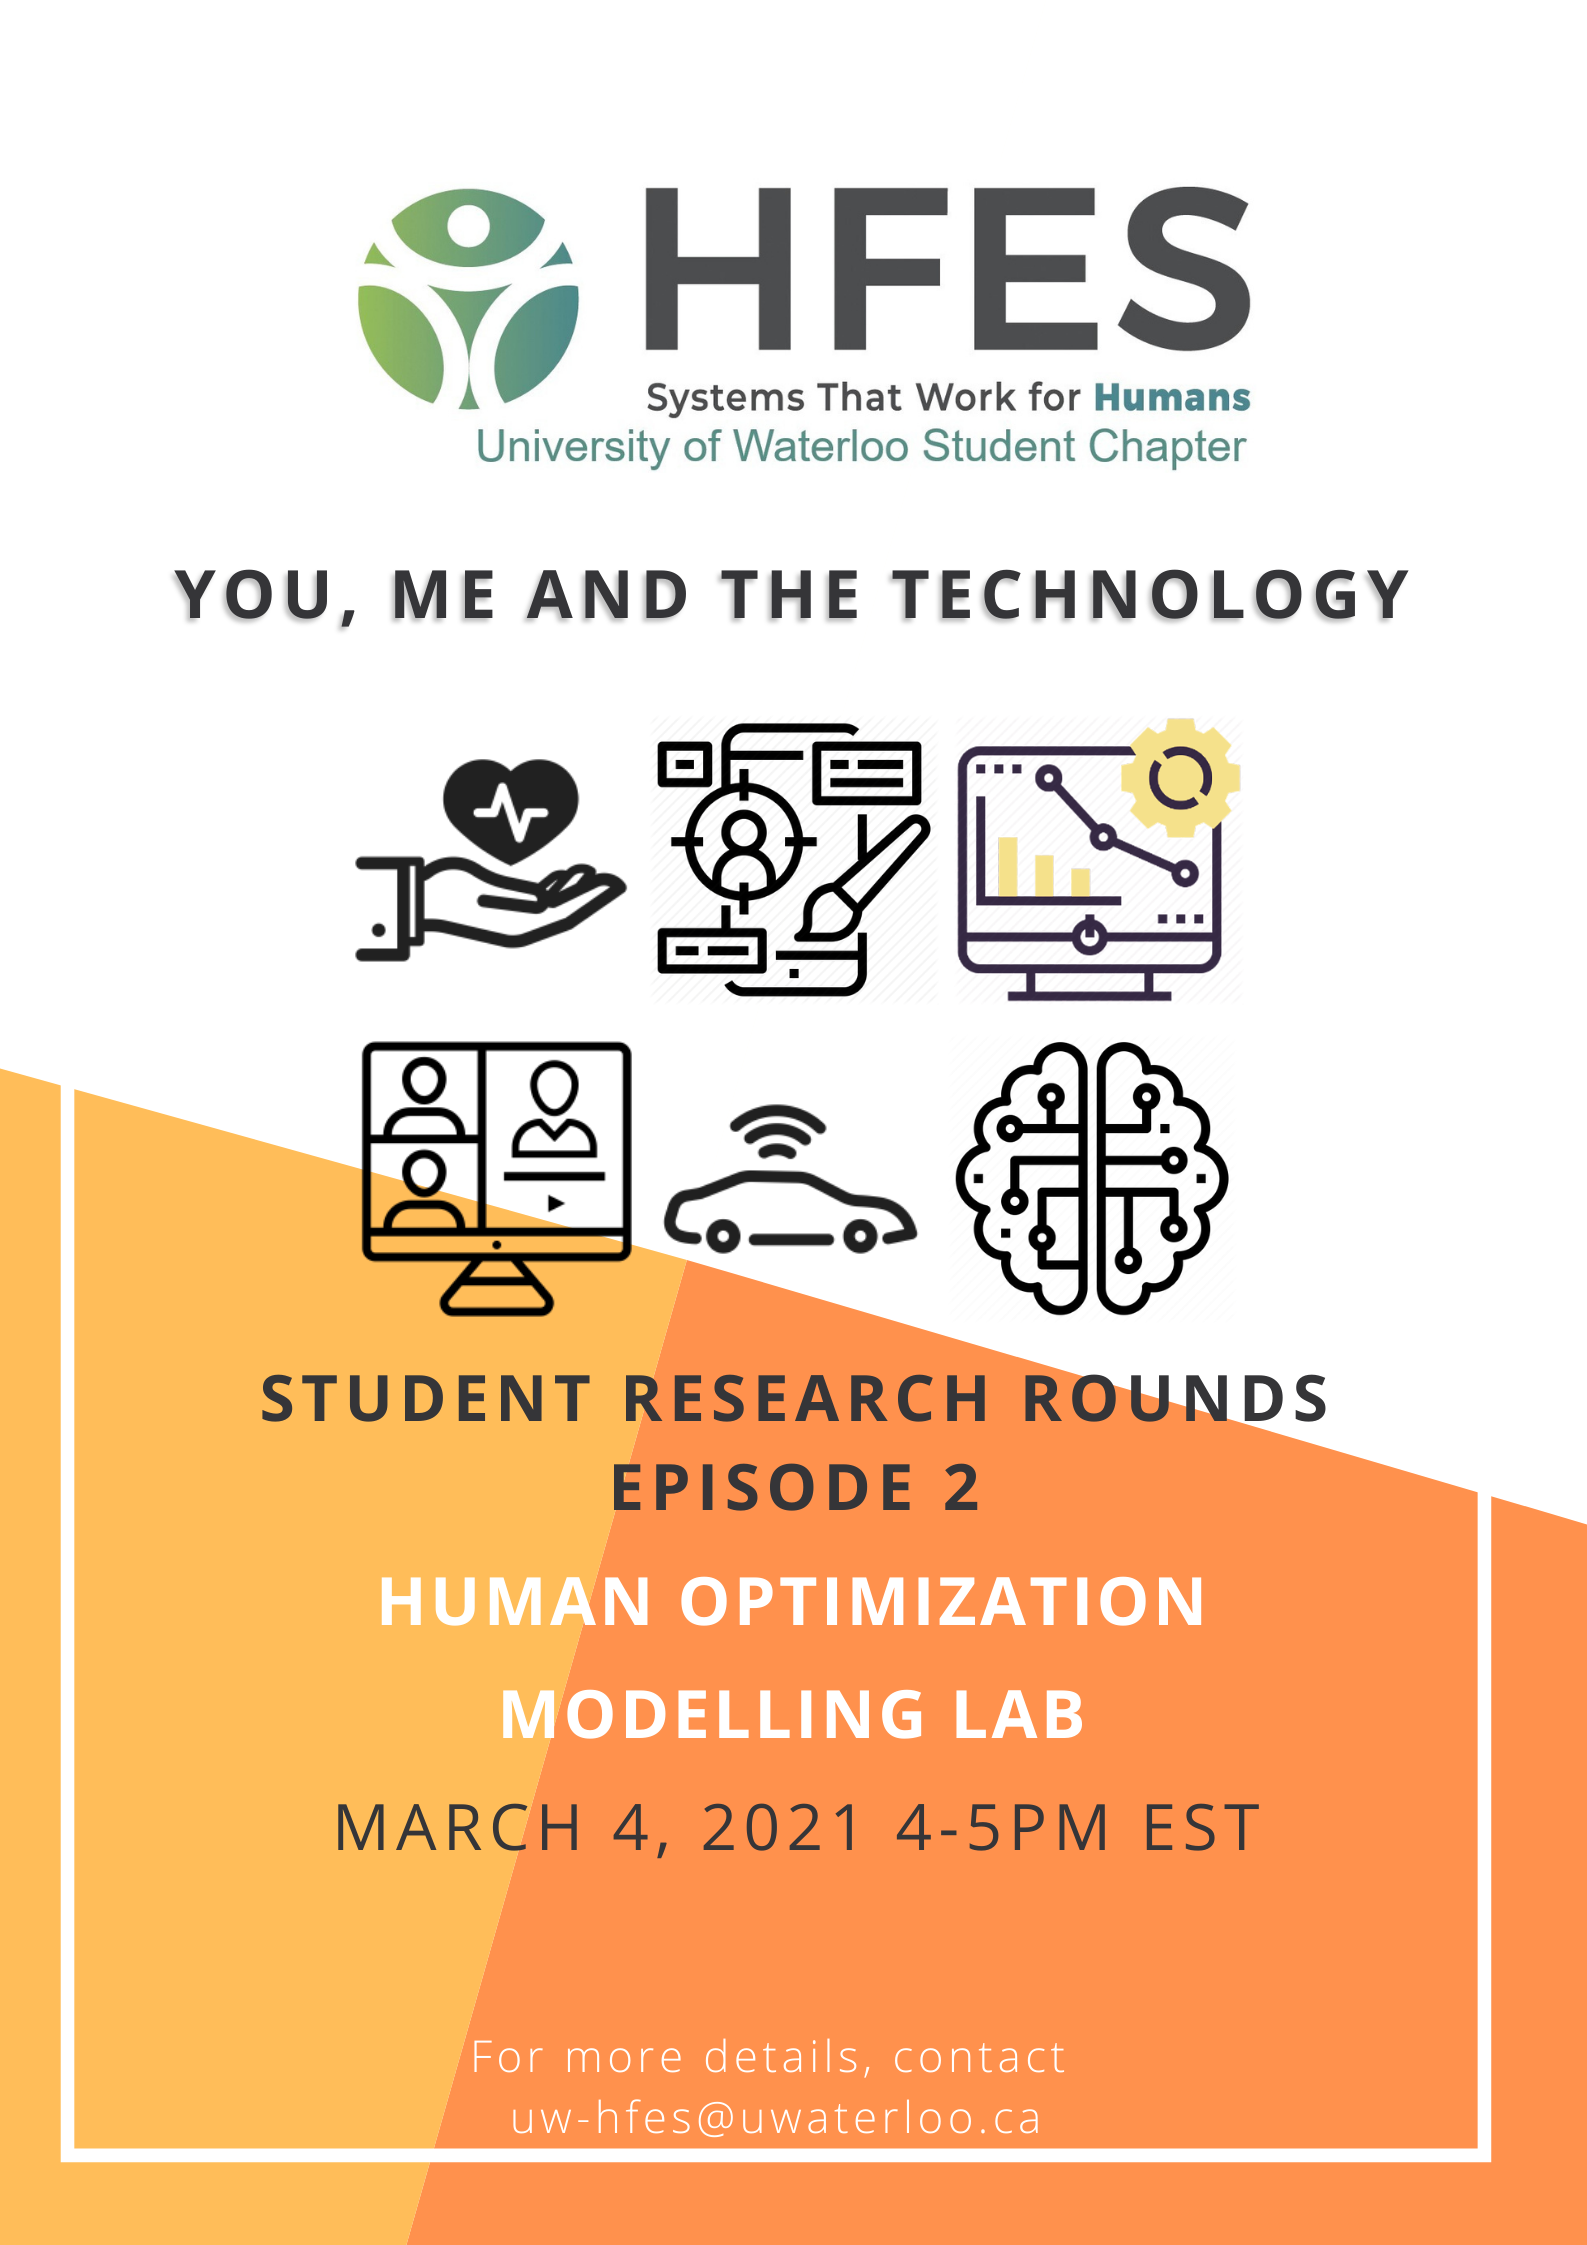 Student Research Rounds, Episode 2 featuring Human Optimization Modelling Lab